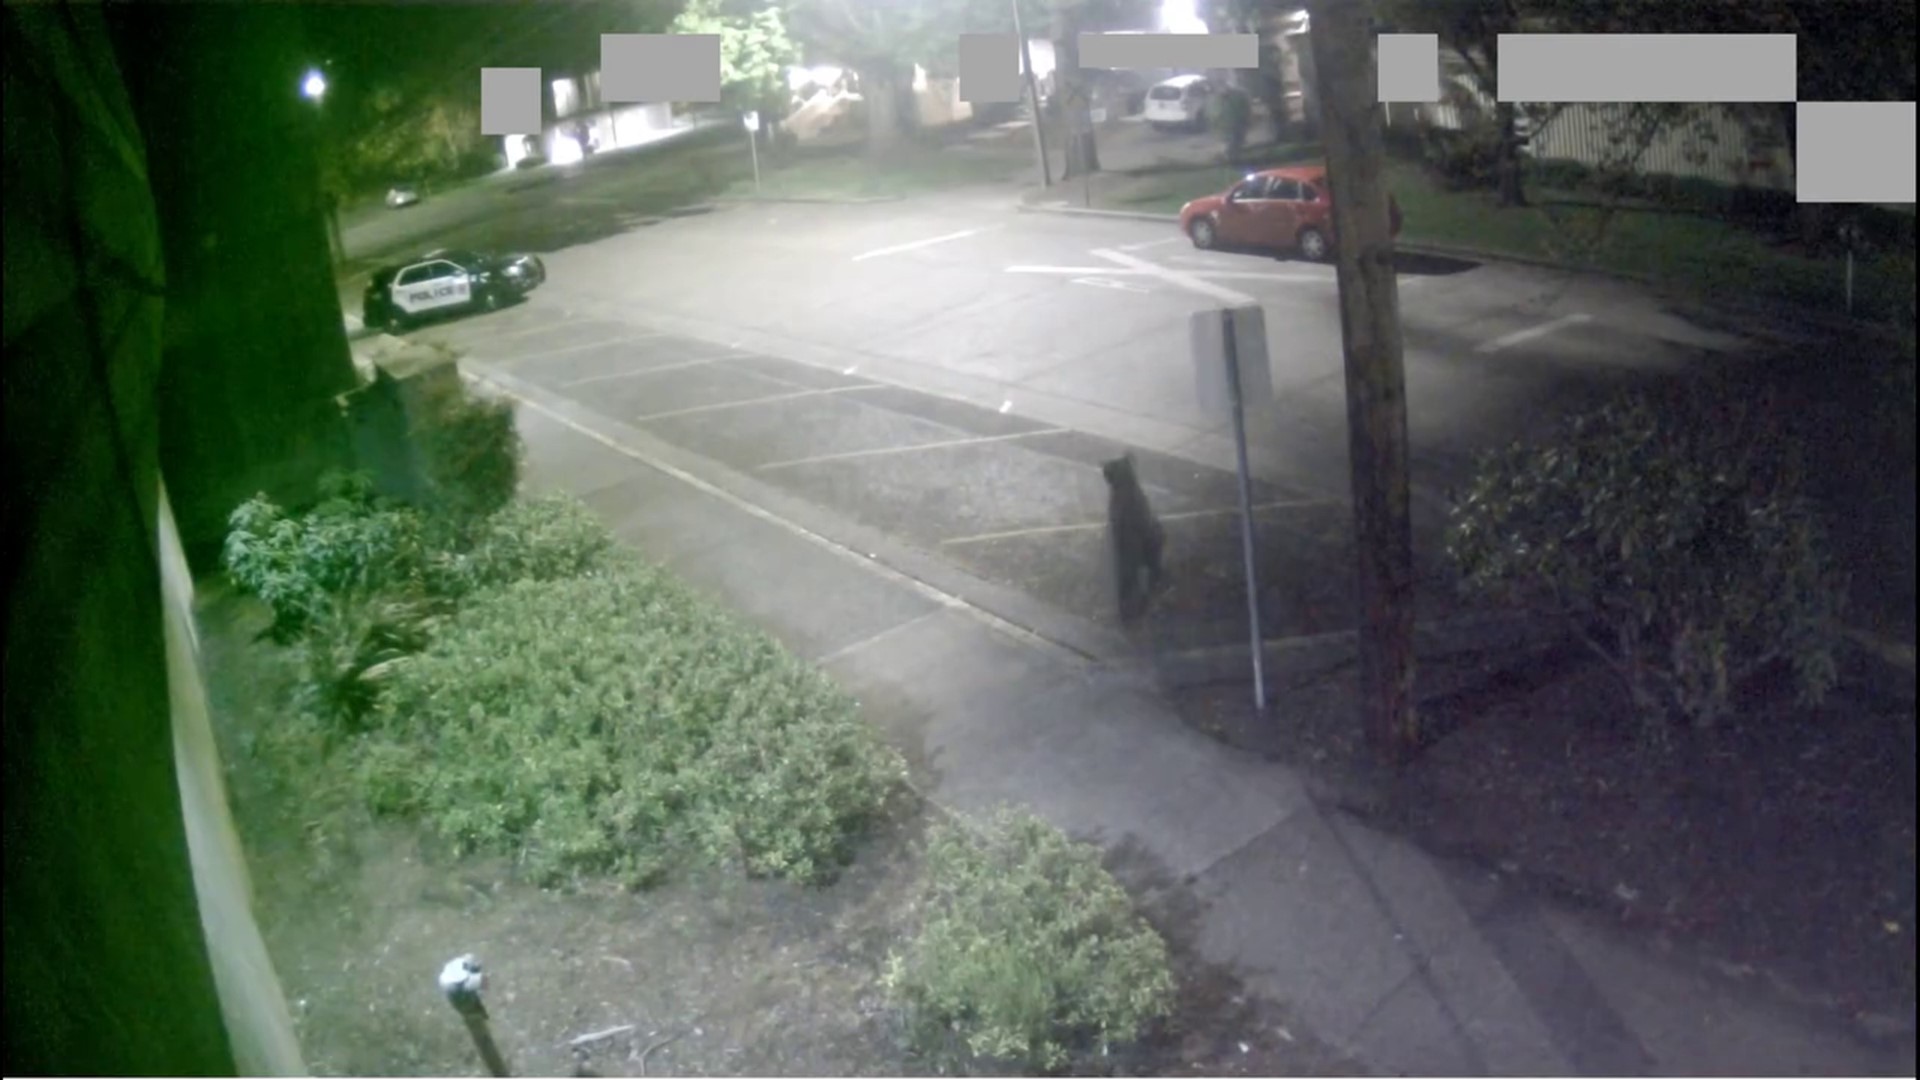 Multiple people reported seeing a black bear in various locations across Corvallis on Sunday morning, the Corvallis Police Department reported.